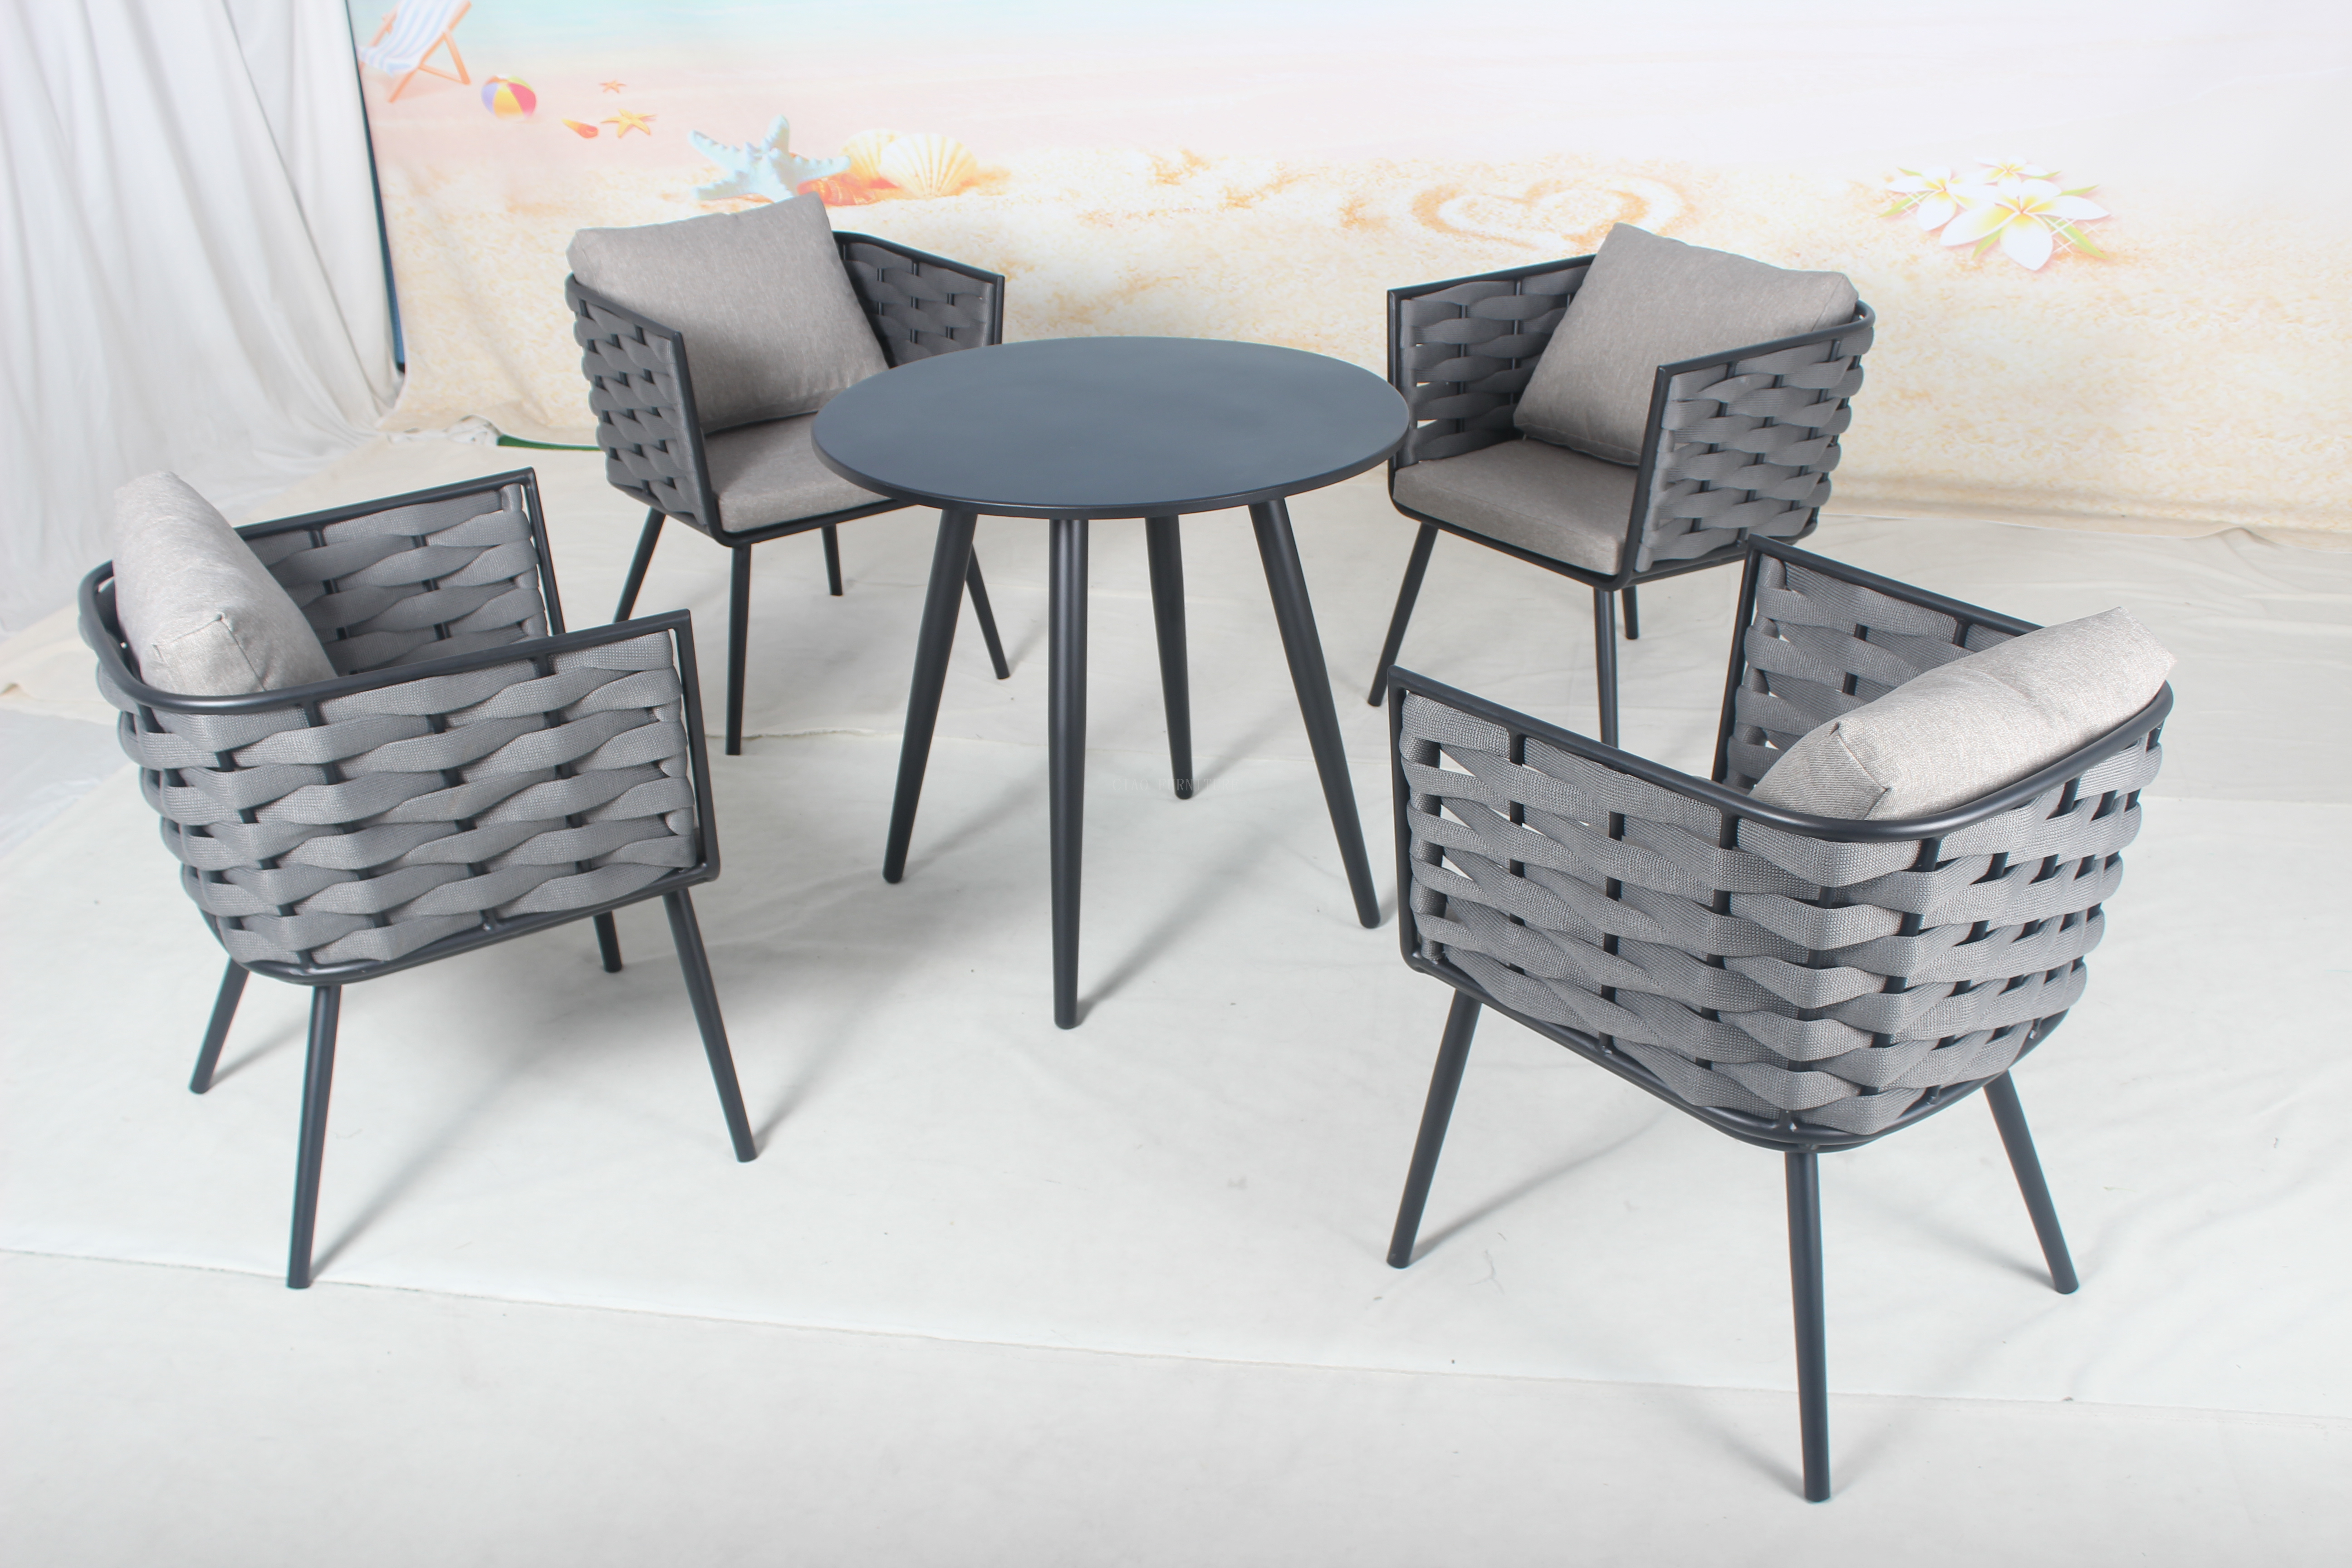 Garden round aluminum table and chairs set